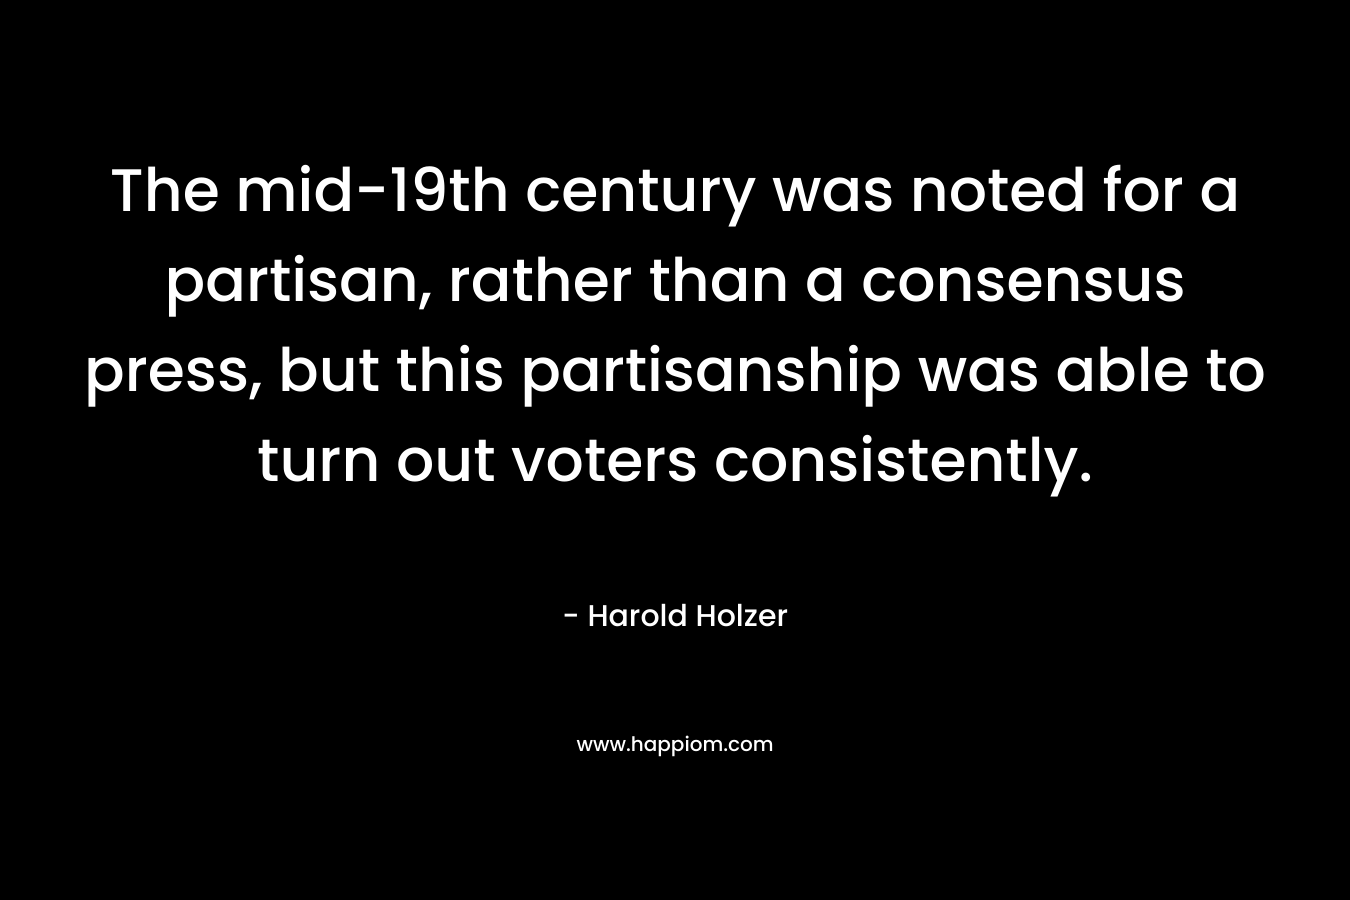 The mid-19th century was noted for a partisan, rather than a consensus press, but this partisanship was able to turn out voters consistently. – Harold Holzer